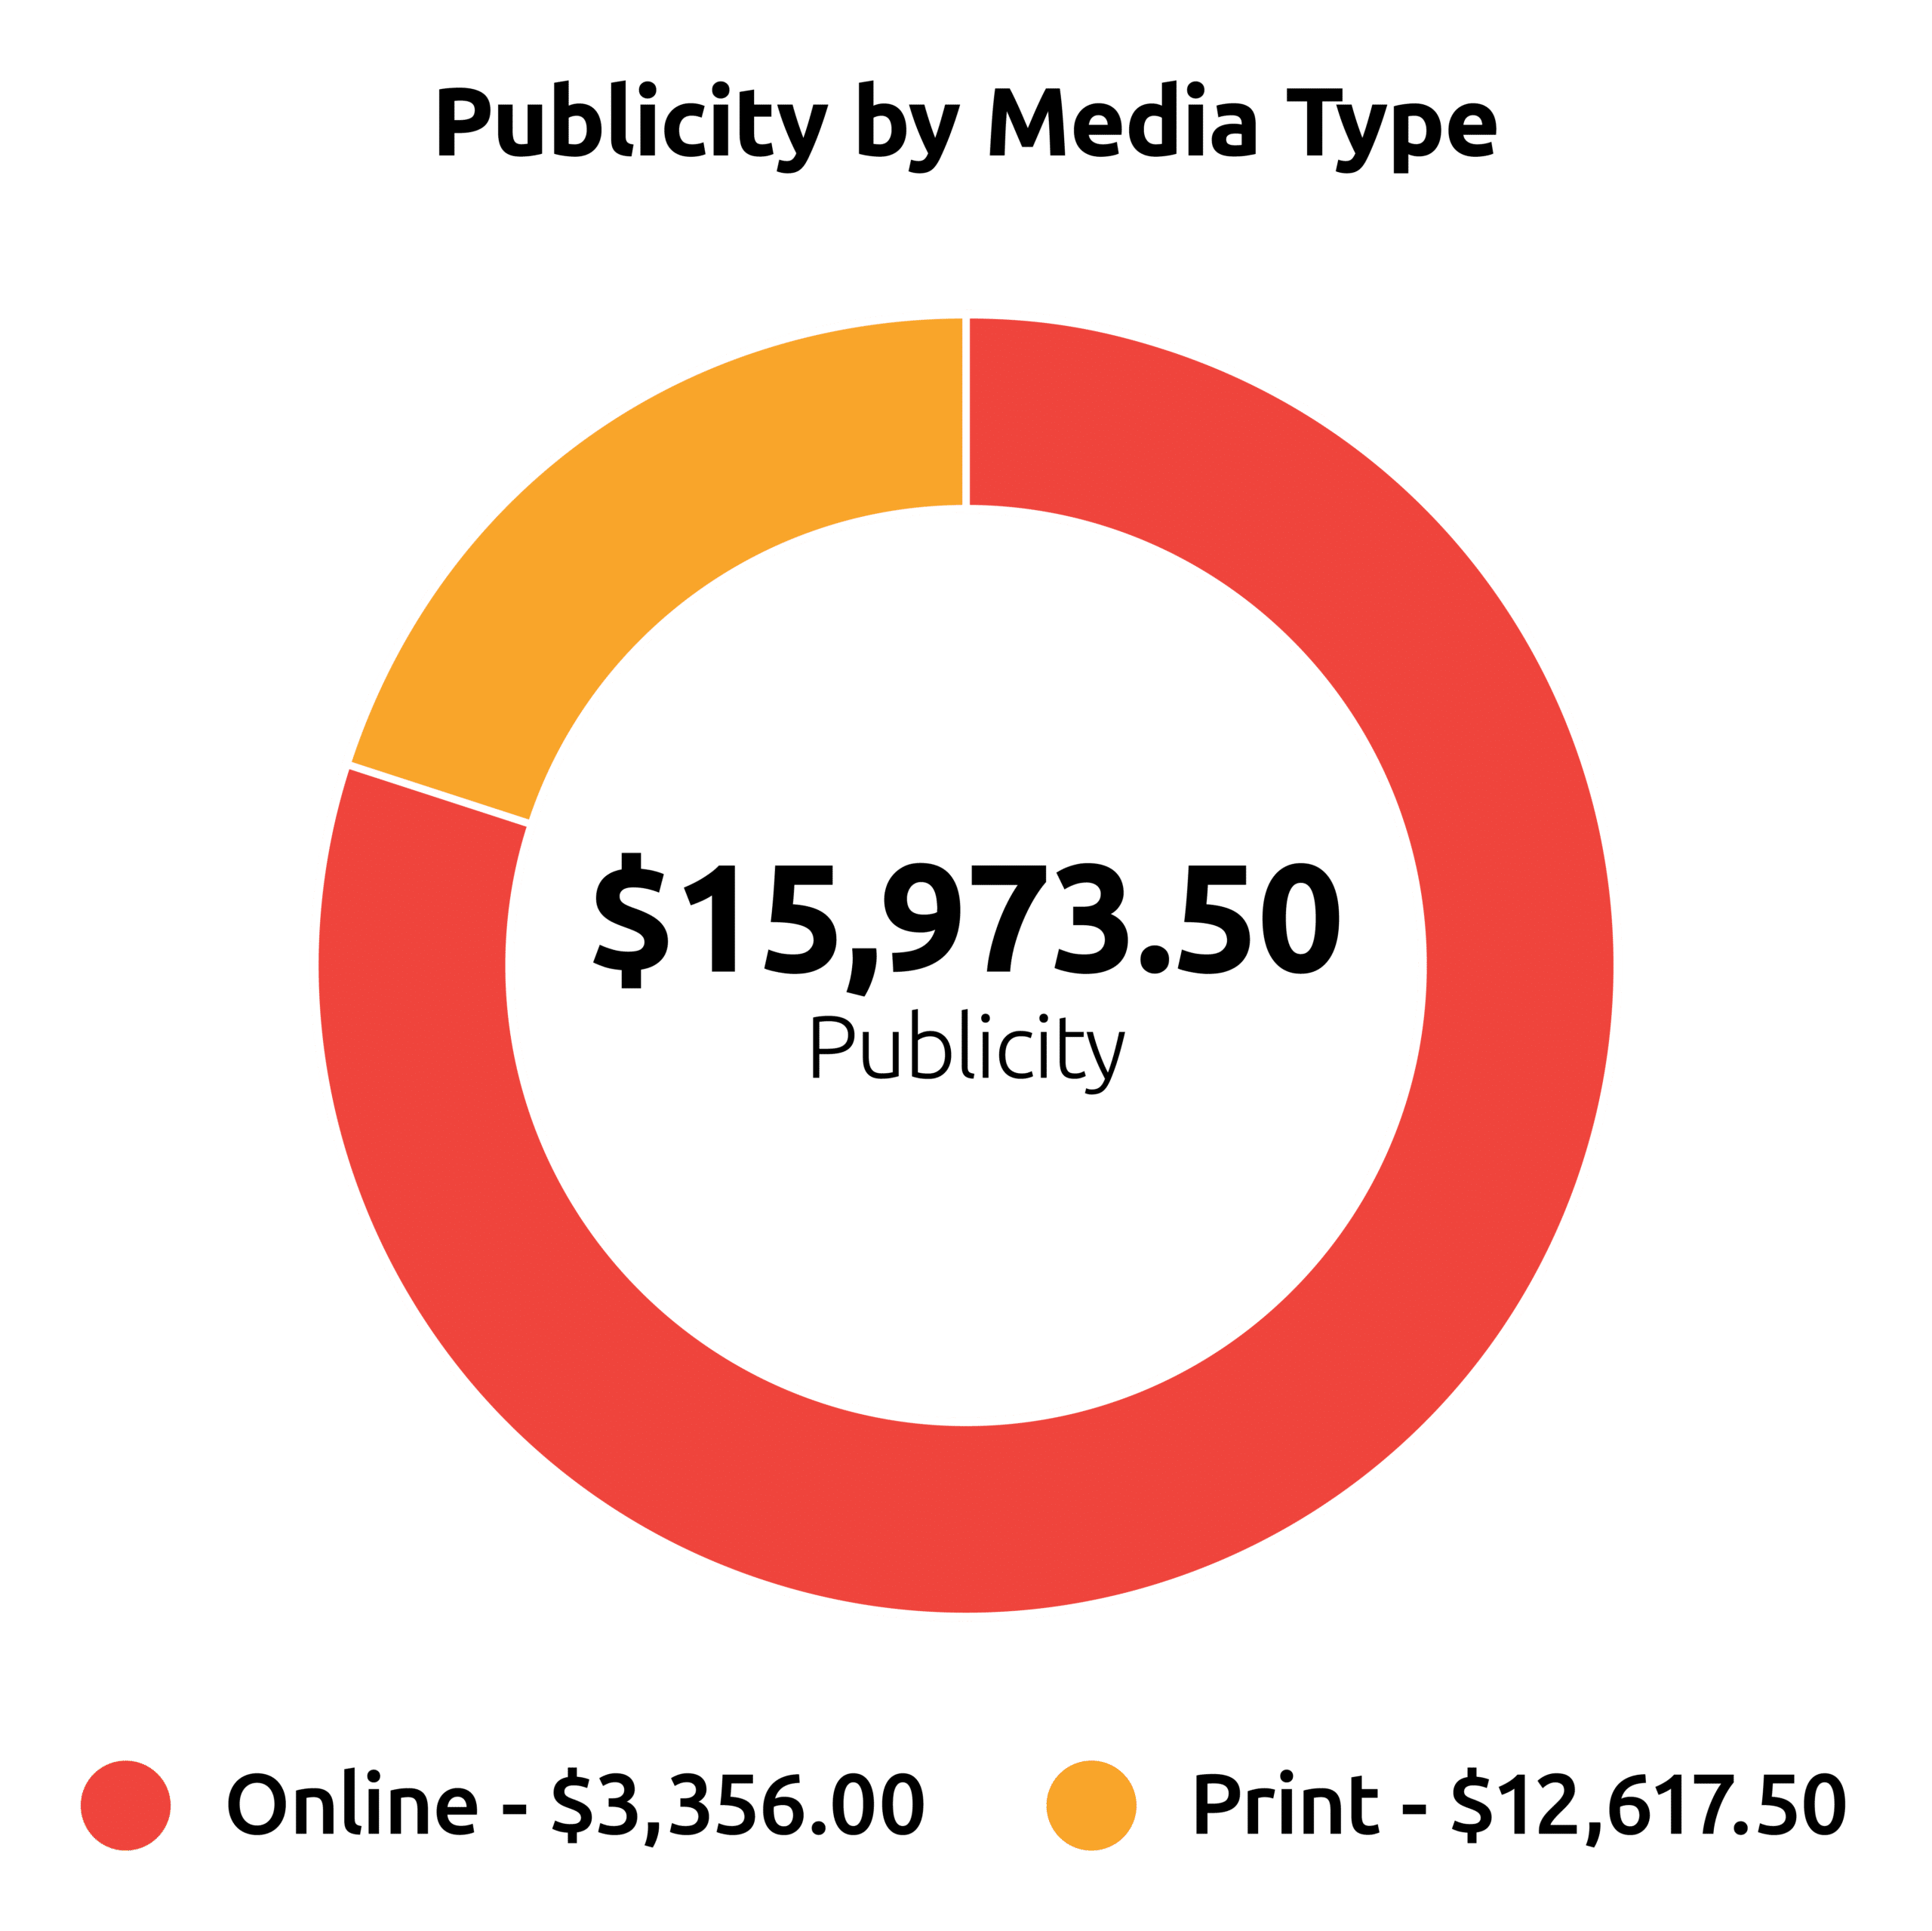 Pie chart style graph showing Publicity by Media Type Total - $15,973.50 Online - $3,356.00 Print - $12,617.50